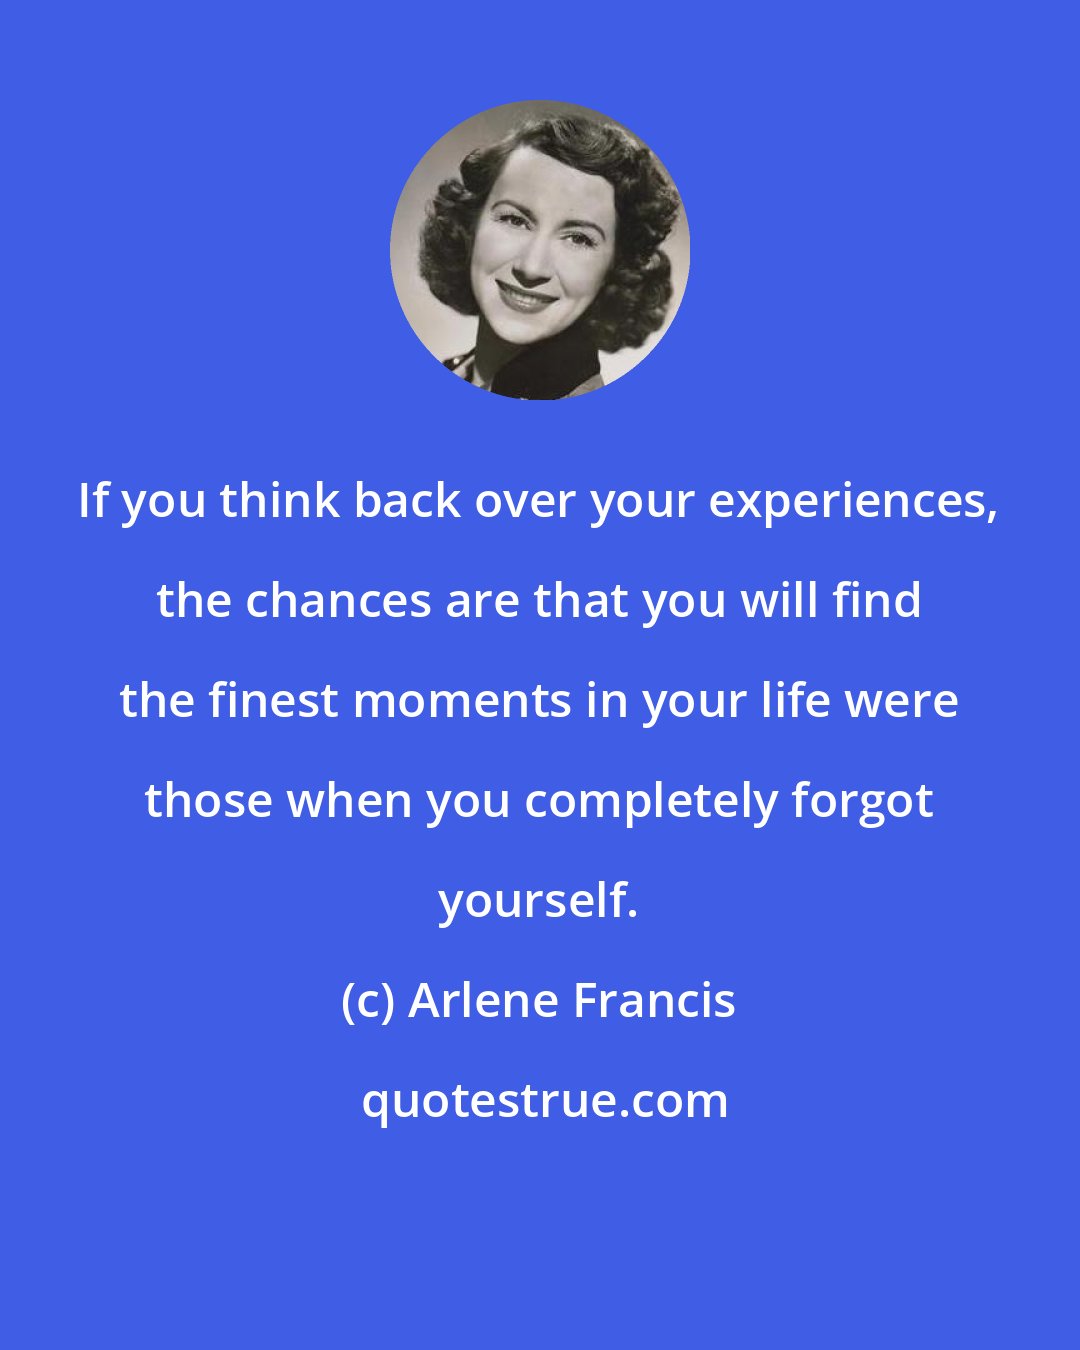 Arlene Francis: If you think back over your experiences, the chances are that you will find the finest moments in your life were those when you completely forgot yourself.